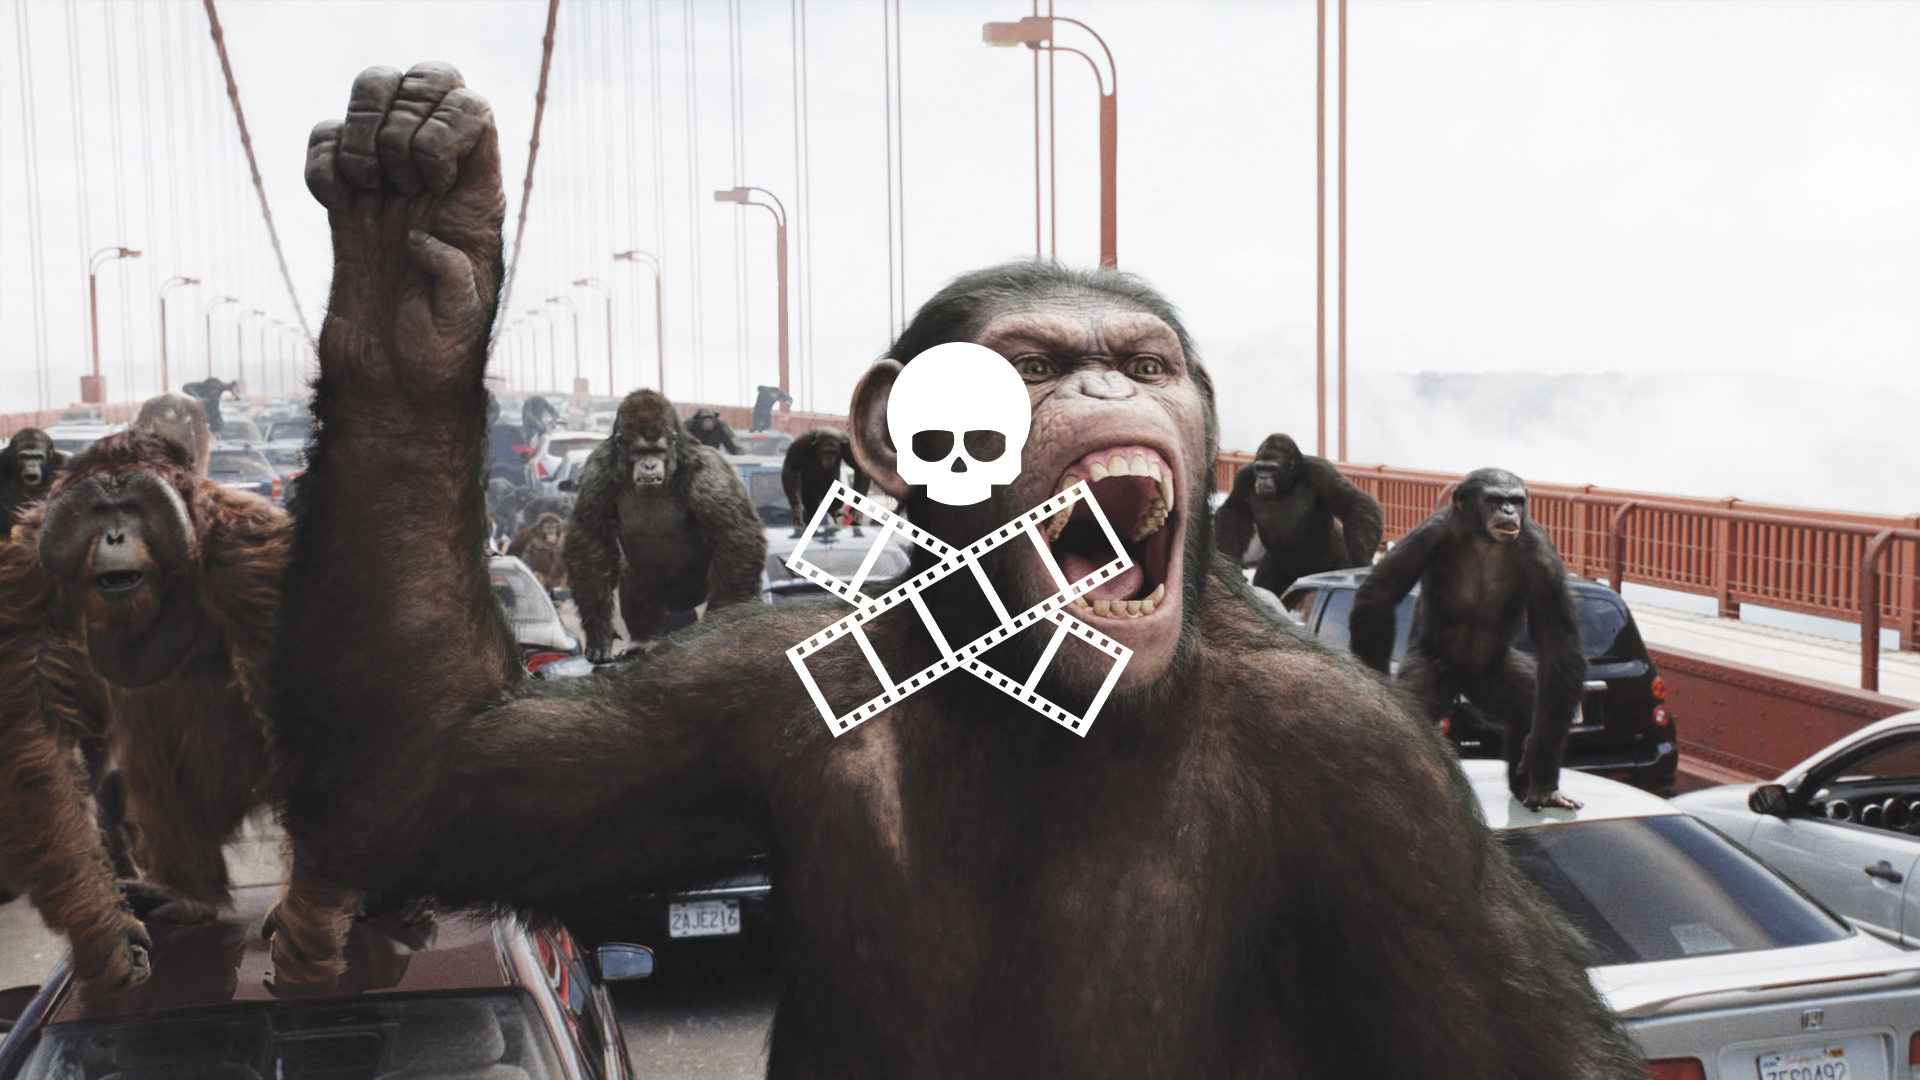 105. Rise of the Planet of the Apes